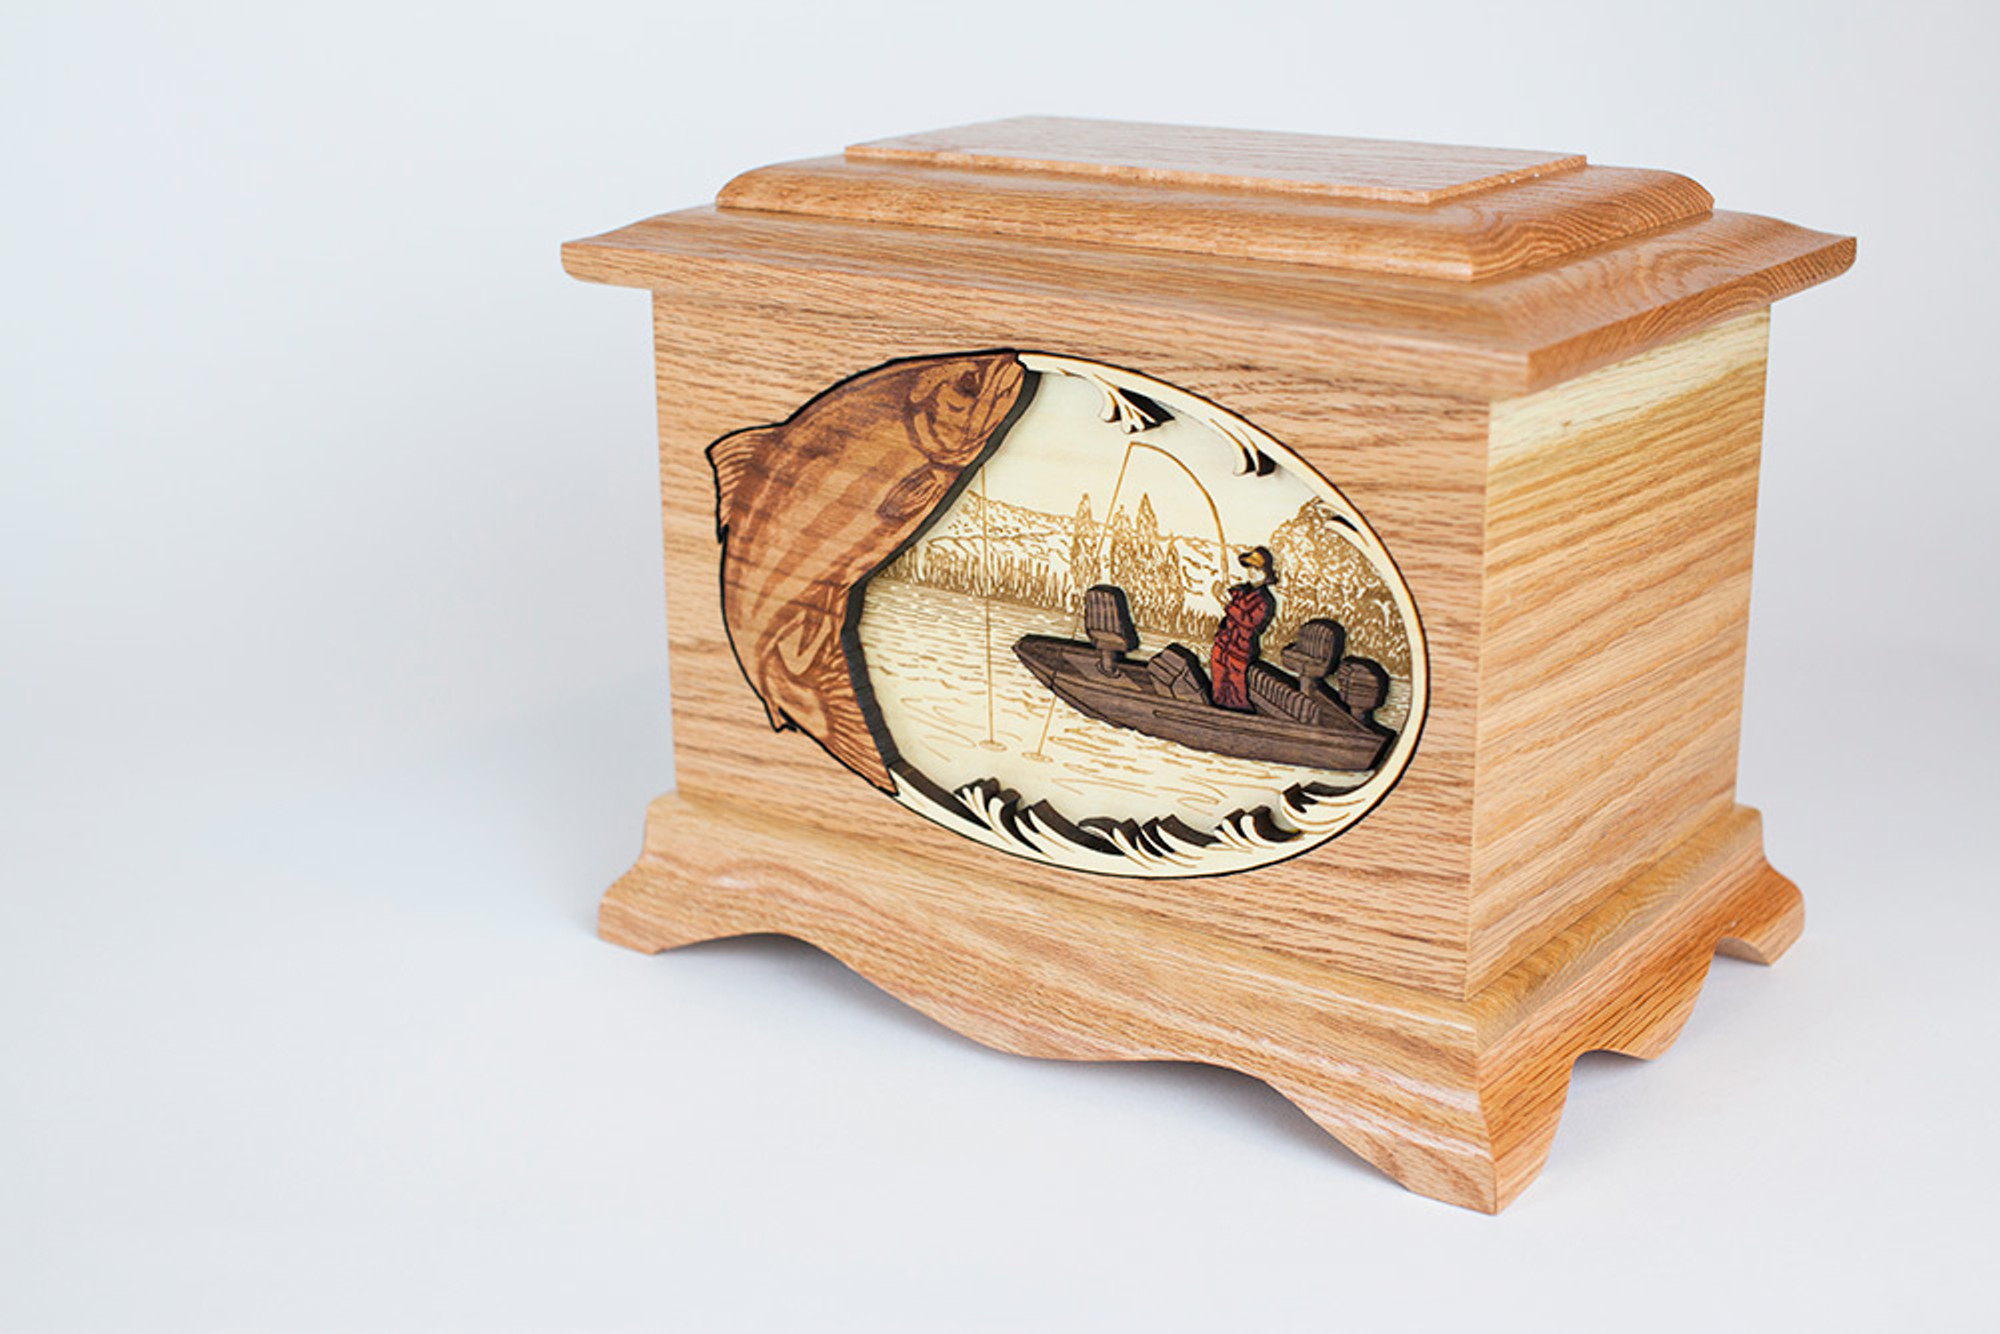 https://cdn11.bigcommerce.com/s-40f15/images/stencil/2000x2000/products/1063/5161/salmon_fishing_wood_cremation_urn_10__15950.1442854989.jpg?c=2